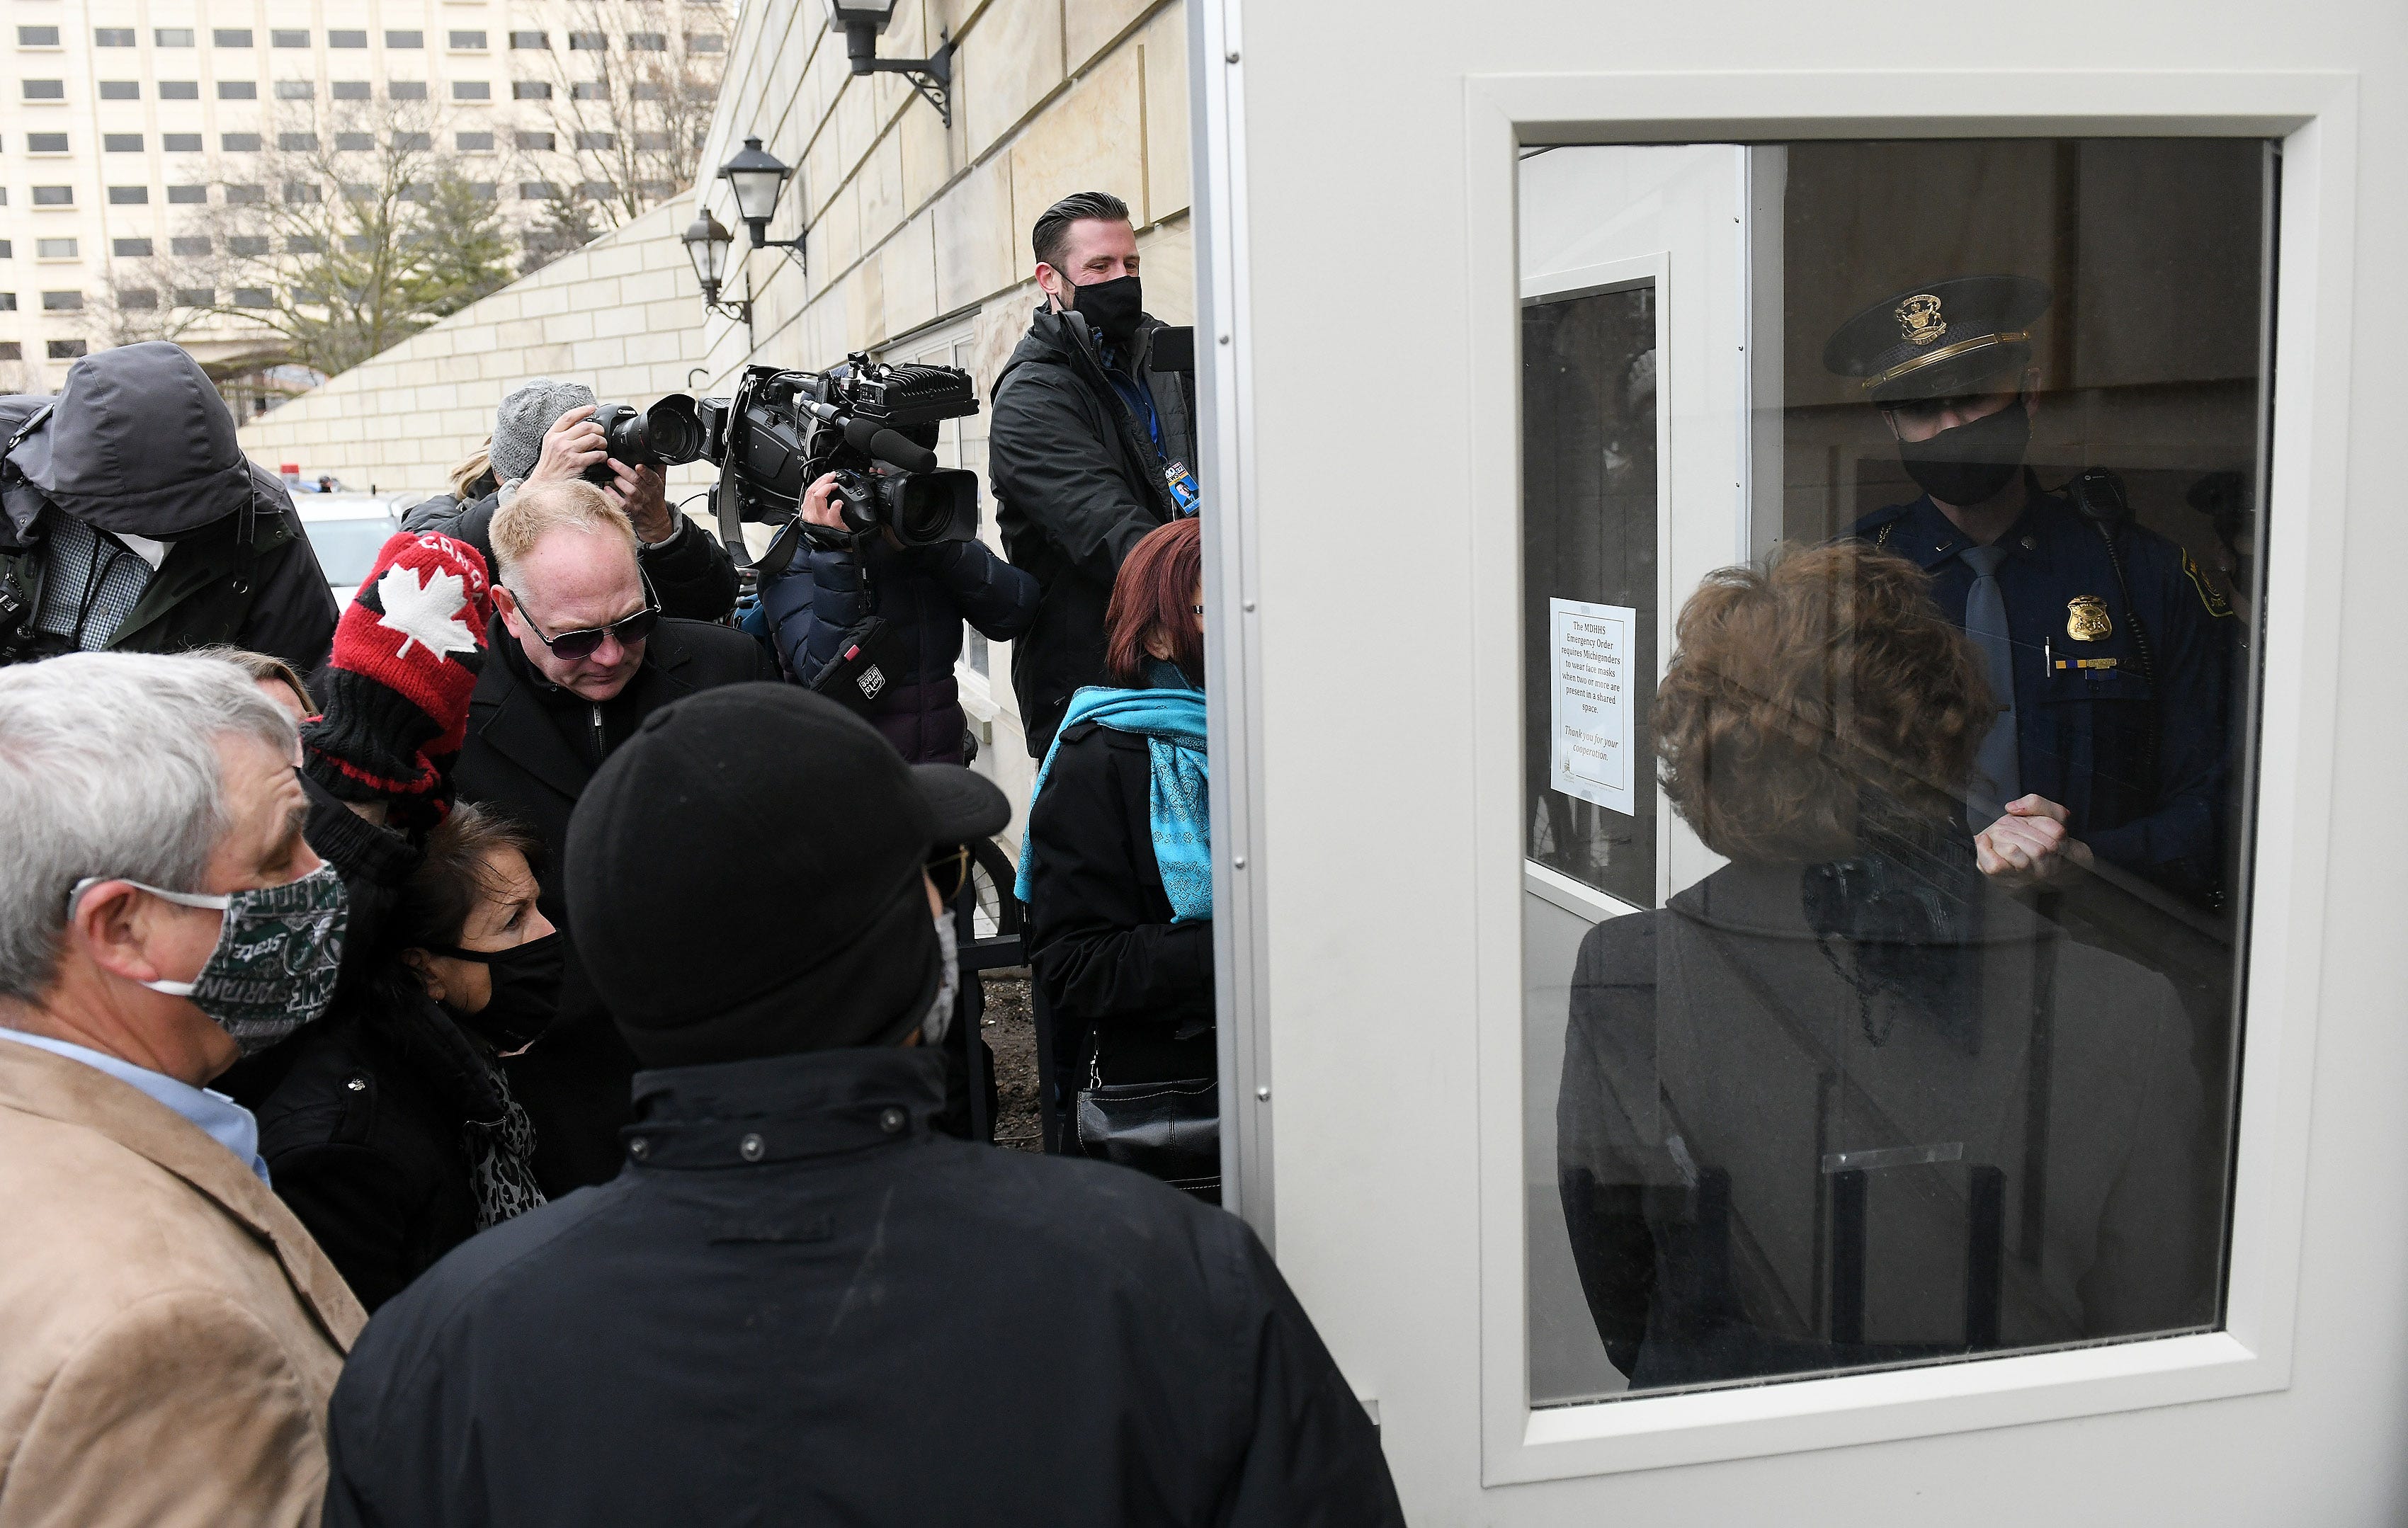 Michigan State Police officer tells state Rep. Daire Rendon, in doorway, and Republican electors that they cannot enter the Michigan State Capitol in Lansing on Dec. 14, 2020.